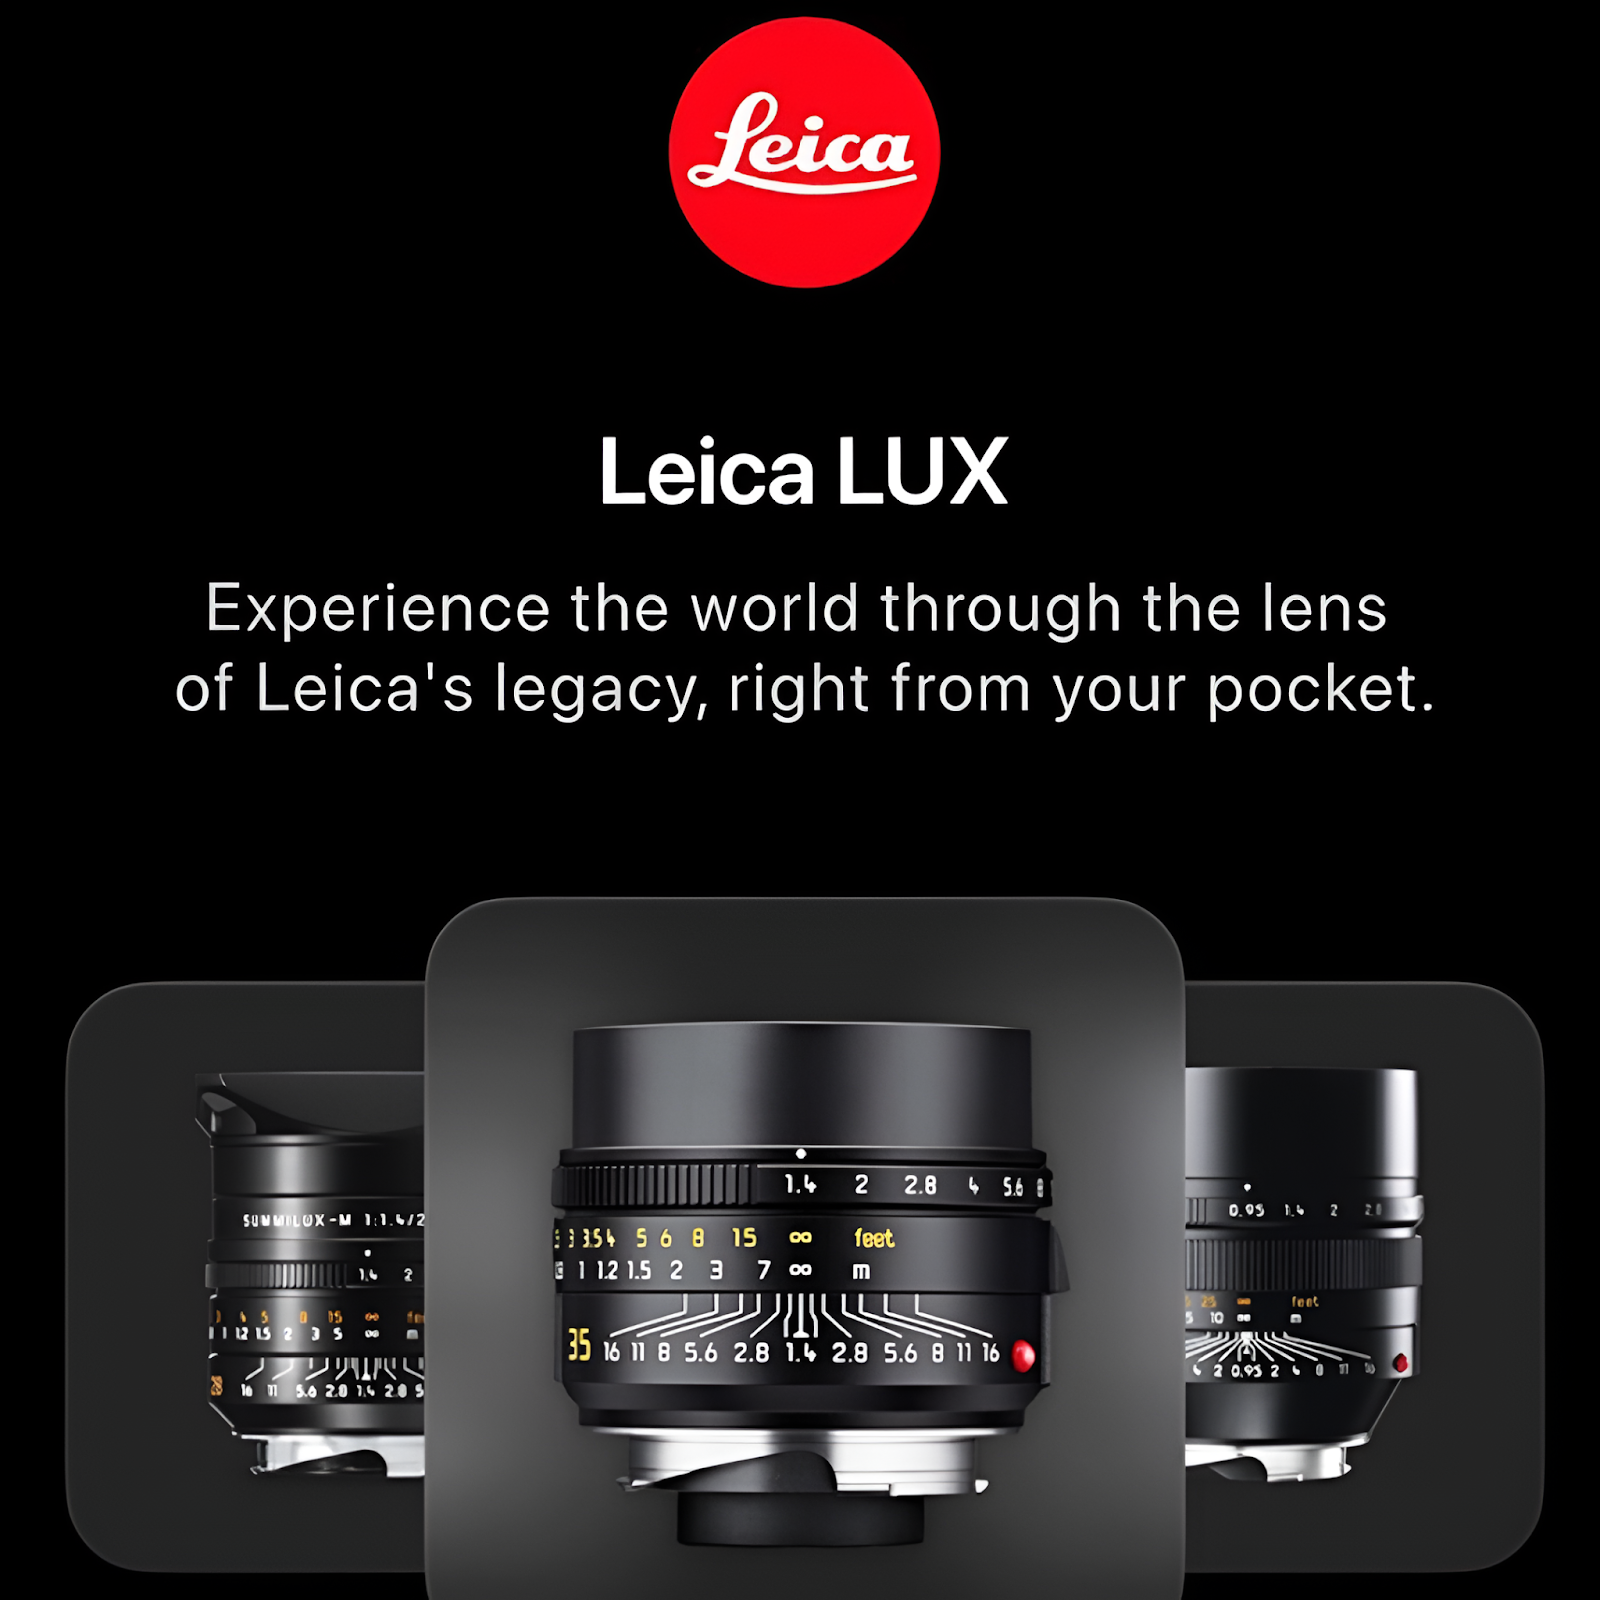 Leica Lux App for iPhone: The Artistry of Mobile Photography